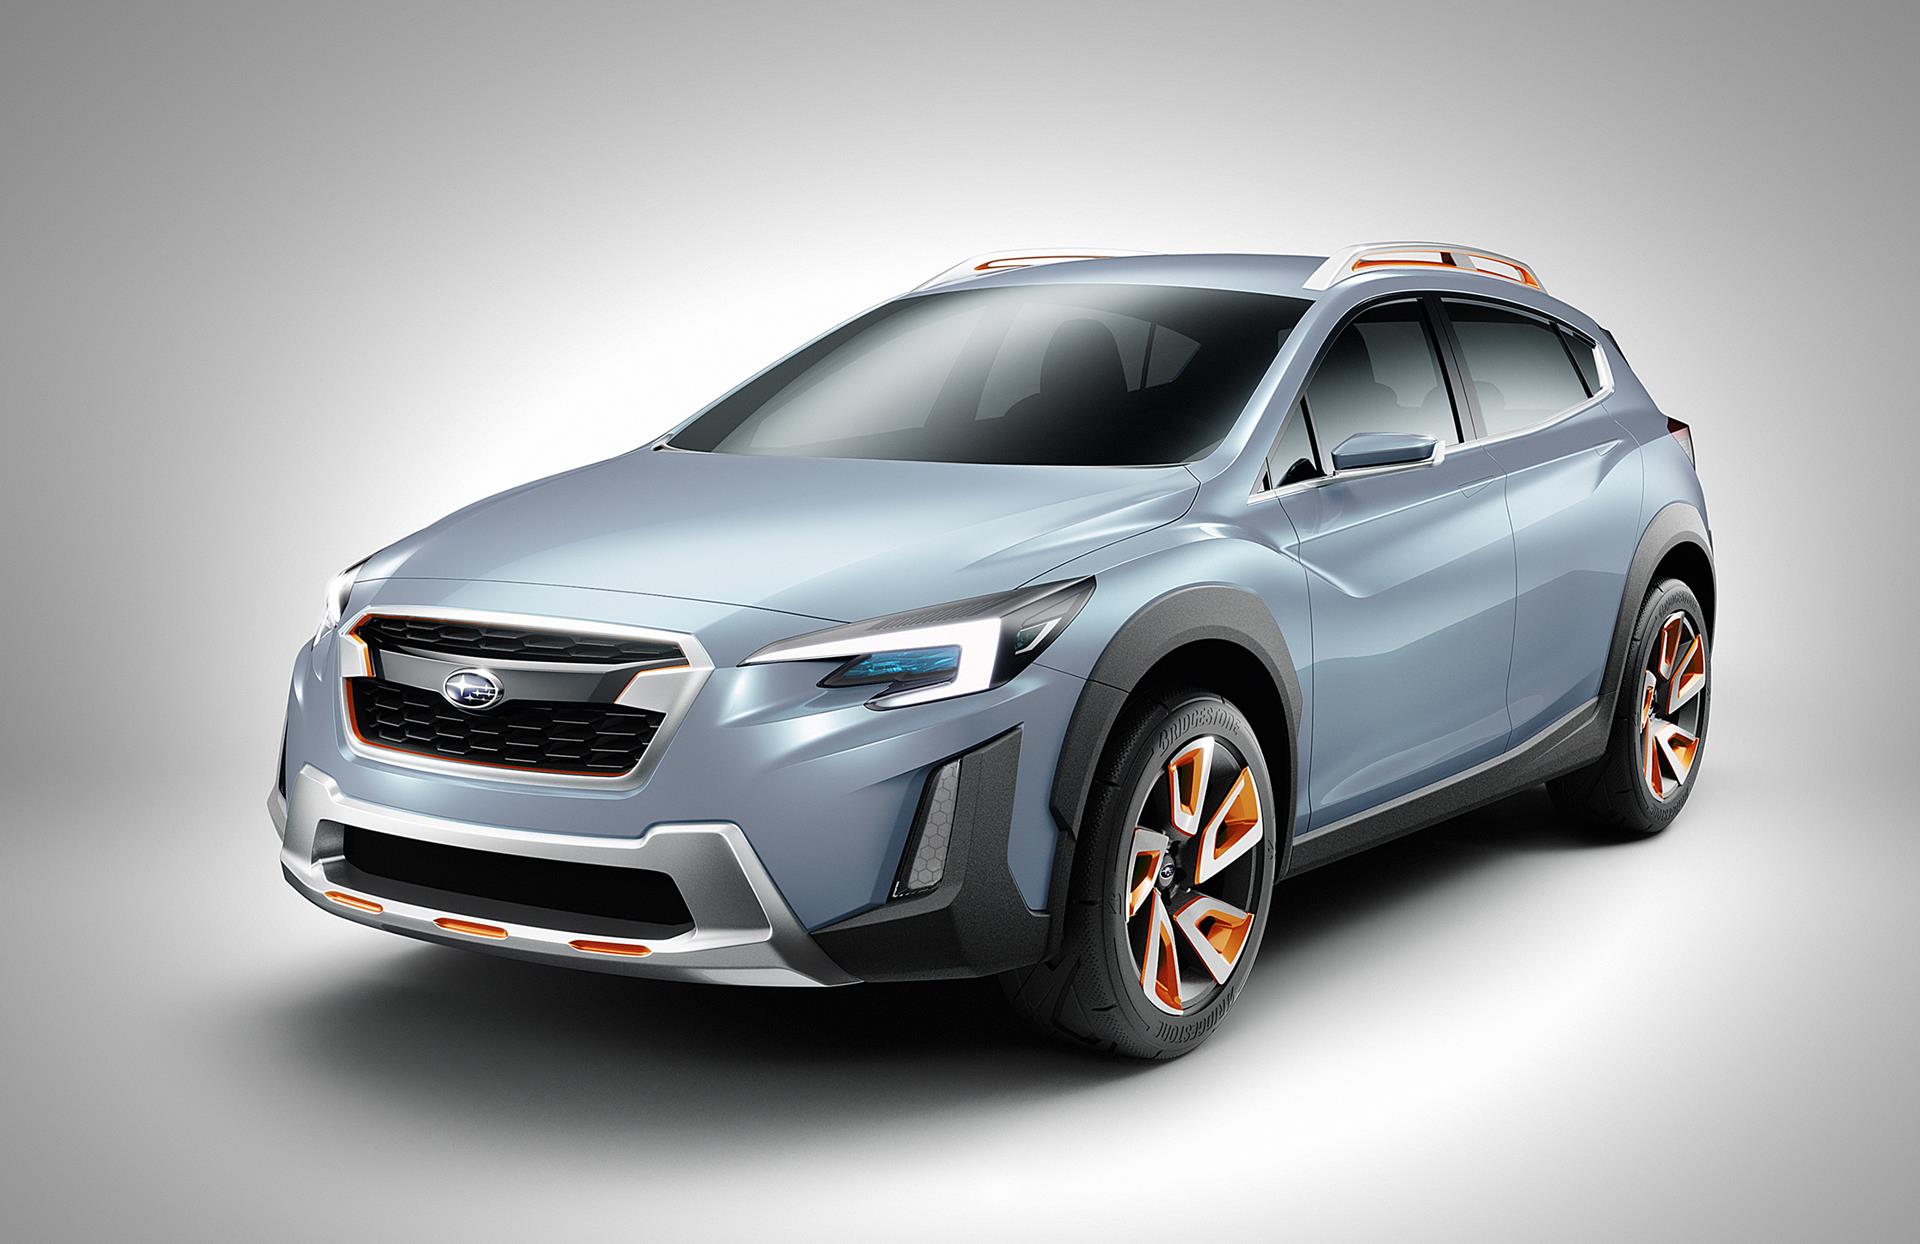 16 Subaru Xv Concept News And Information Research And Pricing